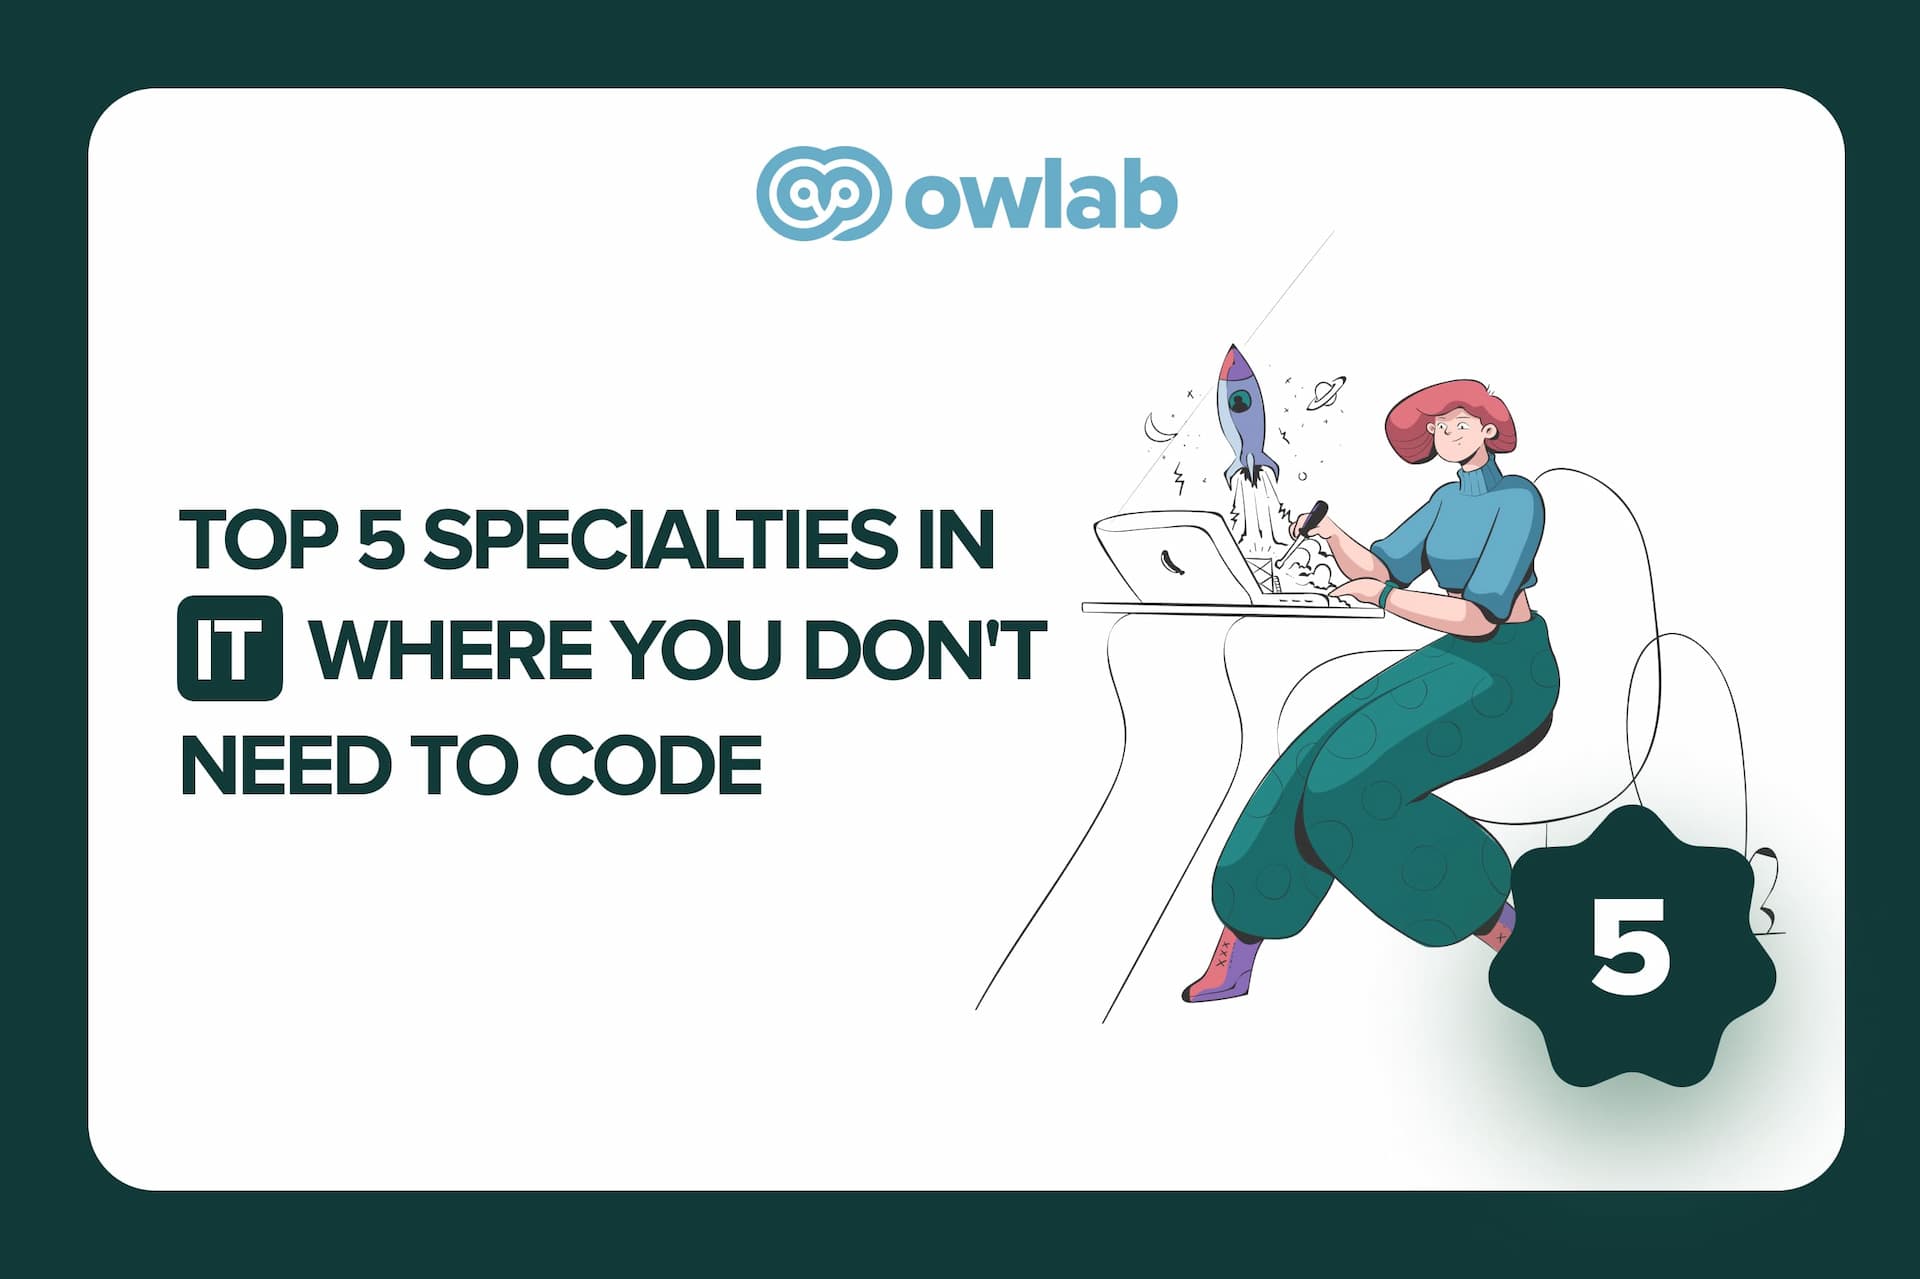 Top 5 Specialties in IT Where You Don't Need to Code